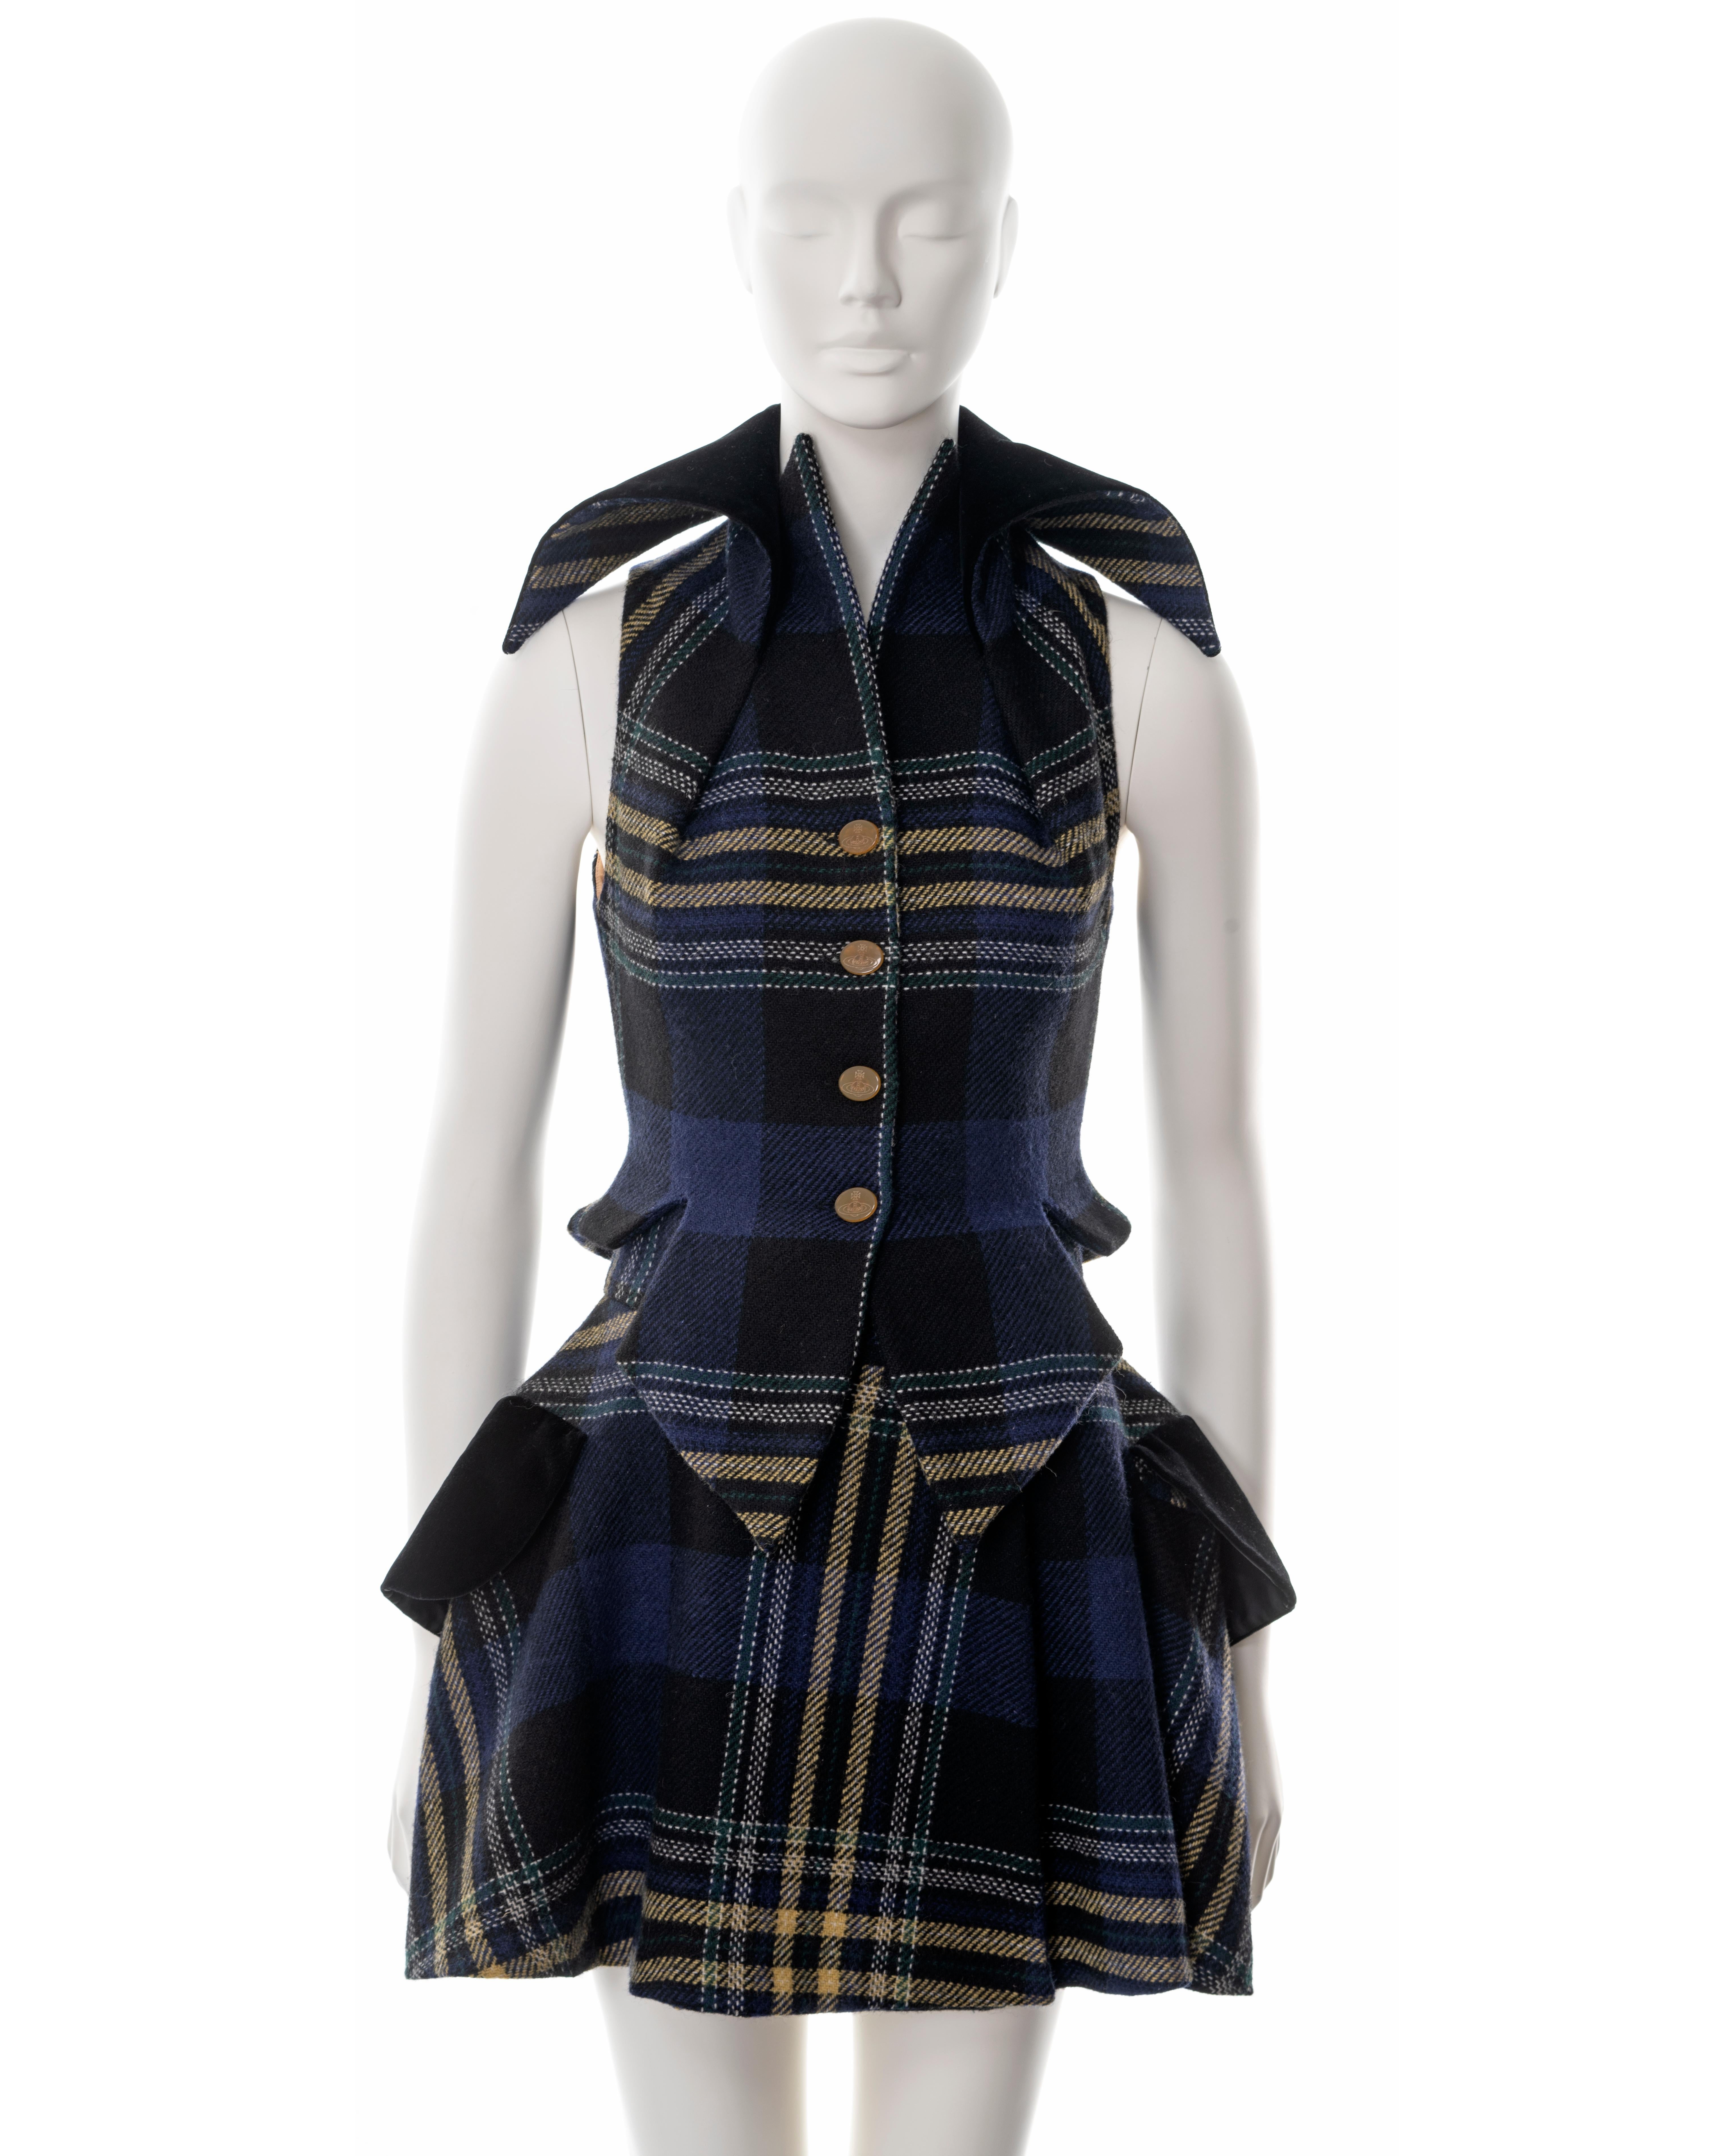 ▪ Vivienne Westwood waistcoat and skirt set
▪ Sold by One of a Kind Archive
▪ Fall-Winter 1994
▪ Blue, yellow, green and white tartan wool 
▪ Fitted waistcoat 
▪ Orb etched buttons 
▪ Black velvet collar and pocket flaps 
▪ High-waisted mini skirt